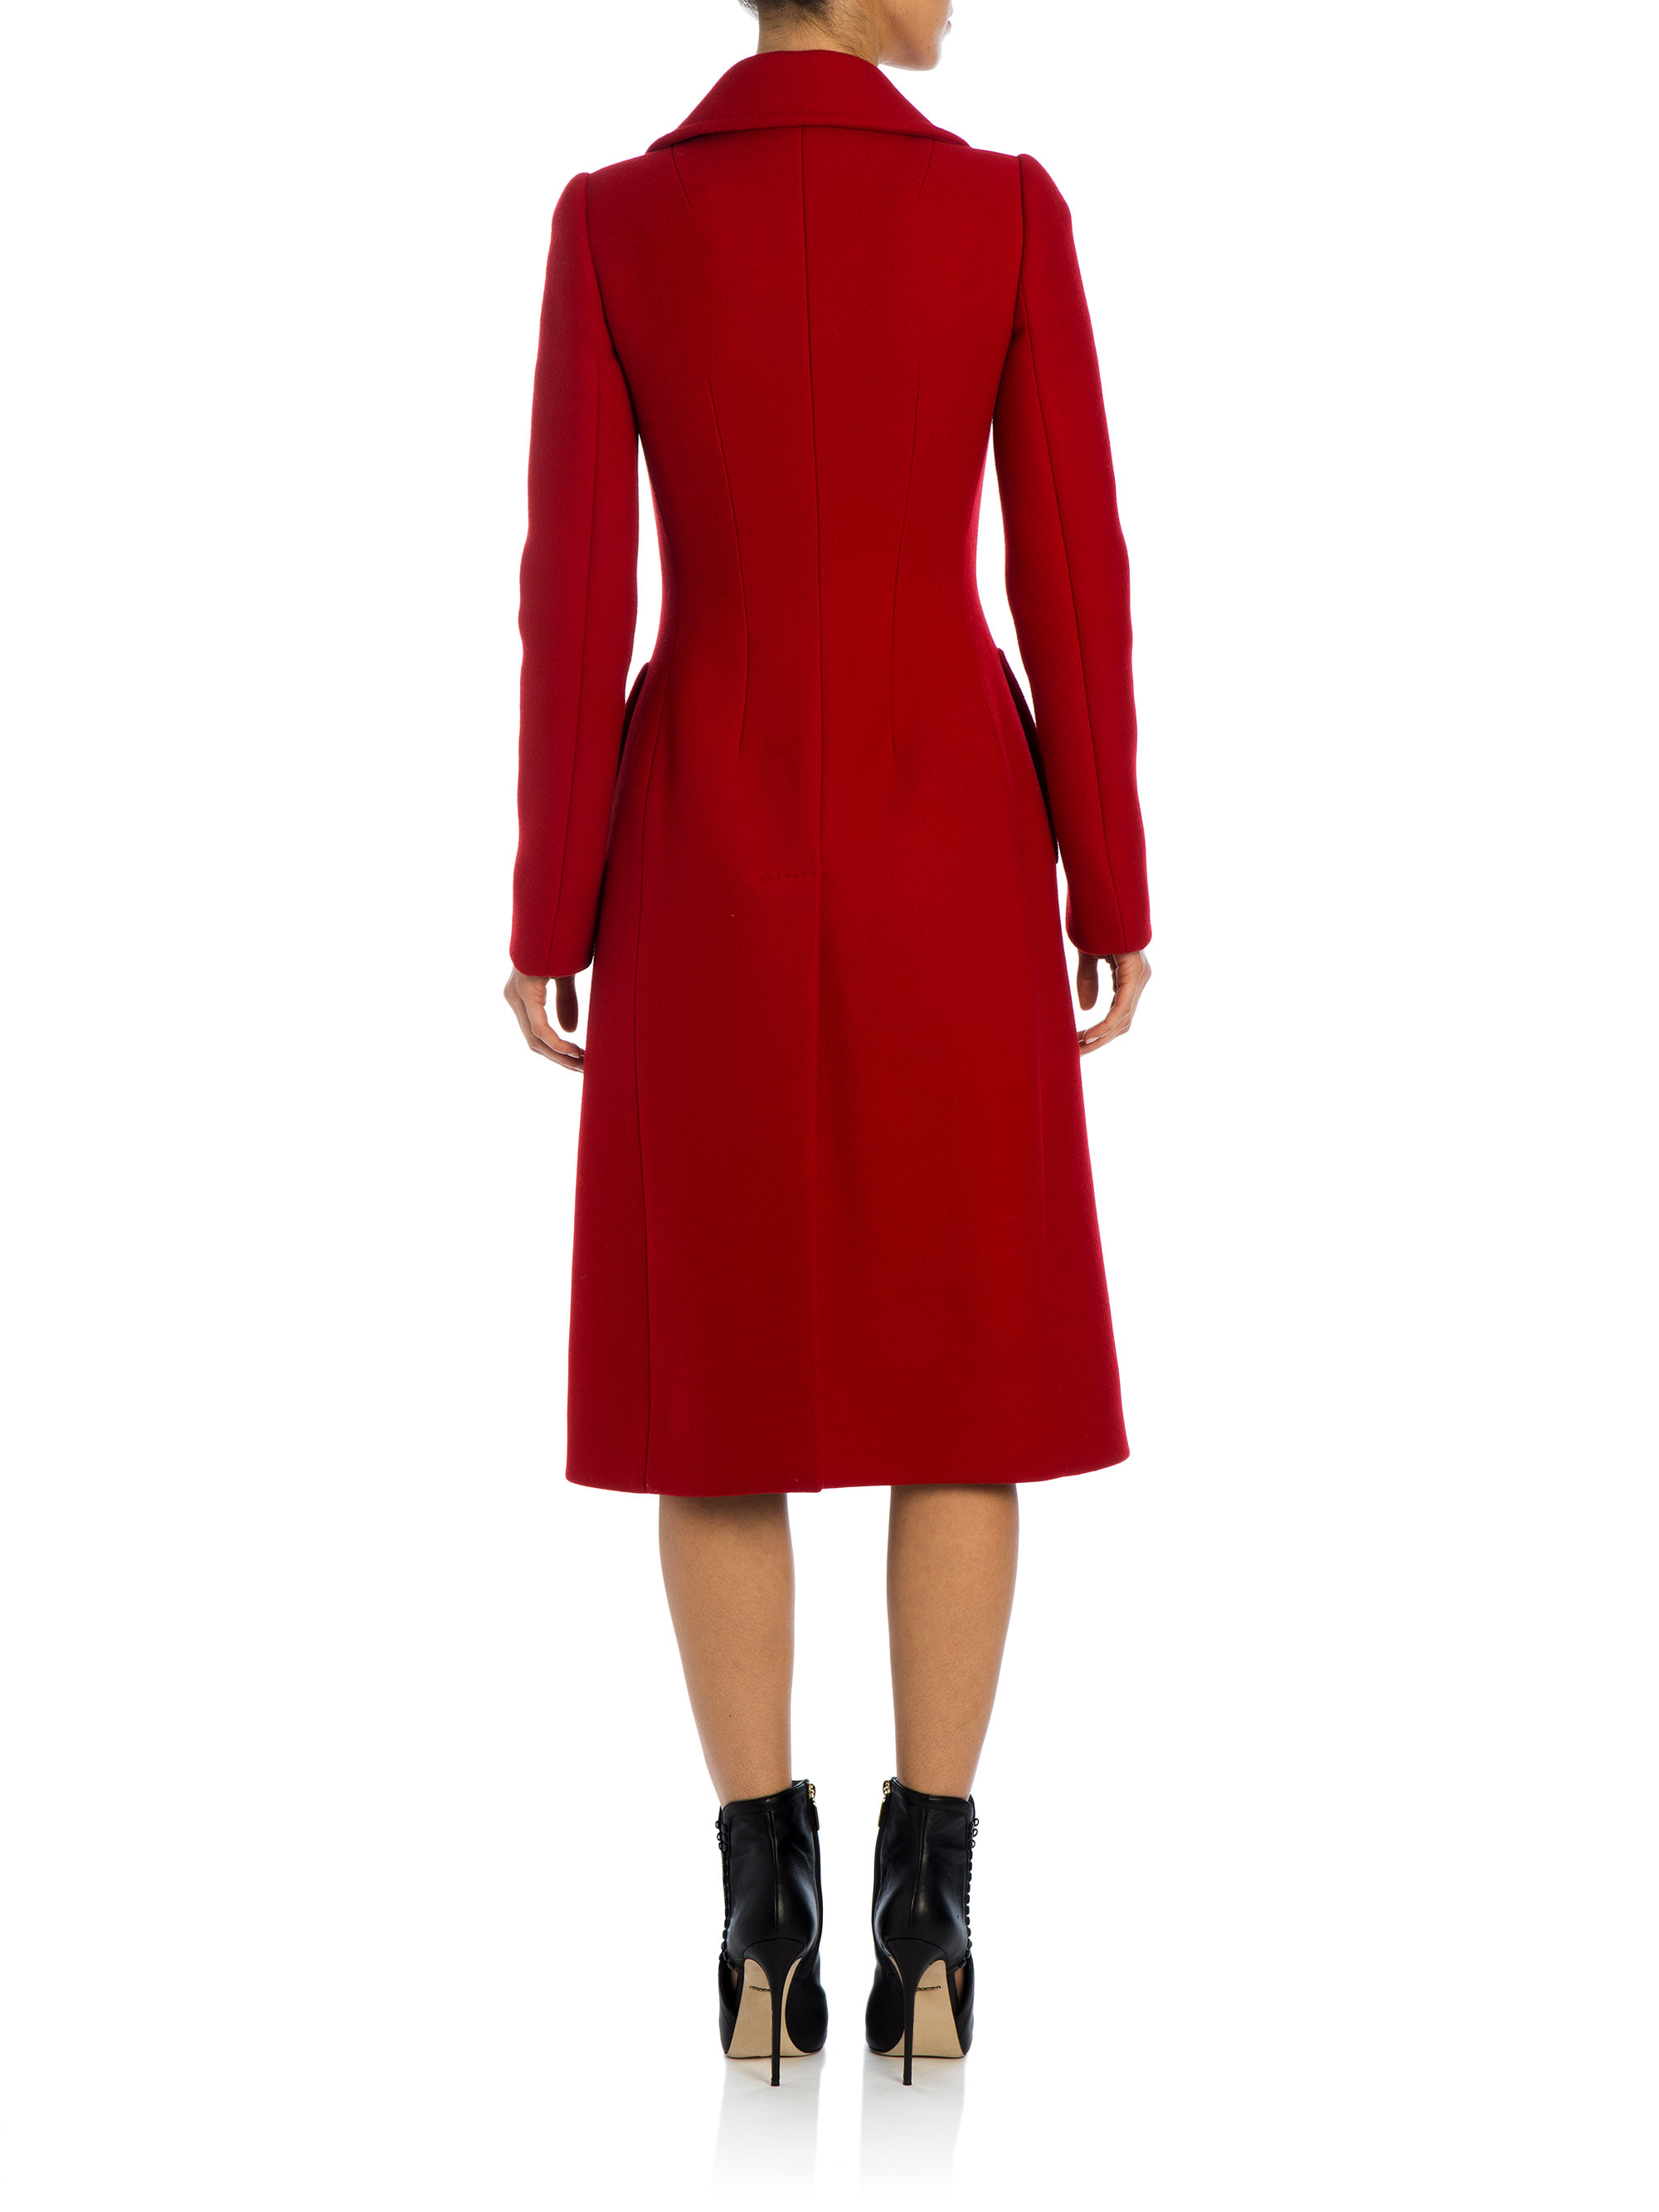 Lyst - Dolce & Gabbana Long Wool-cashmere Coat in Red